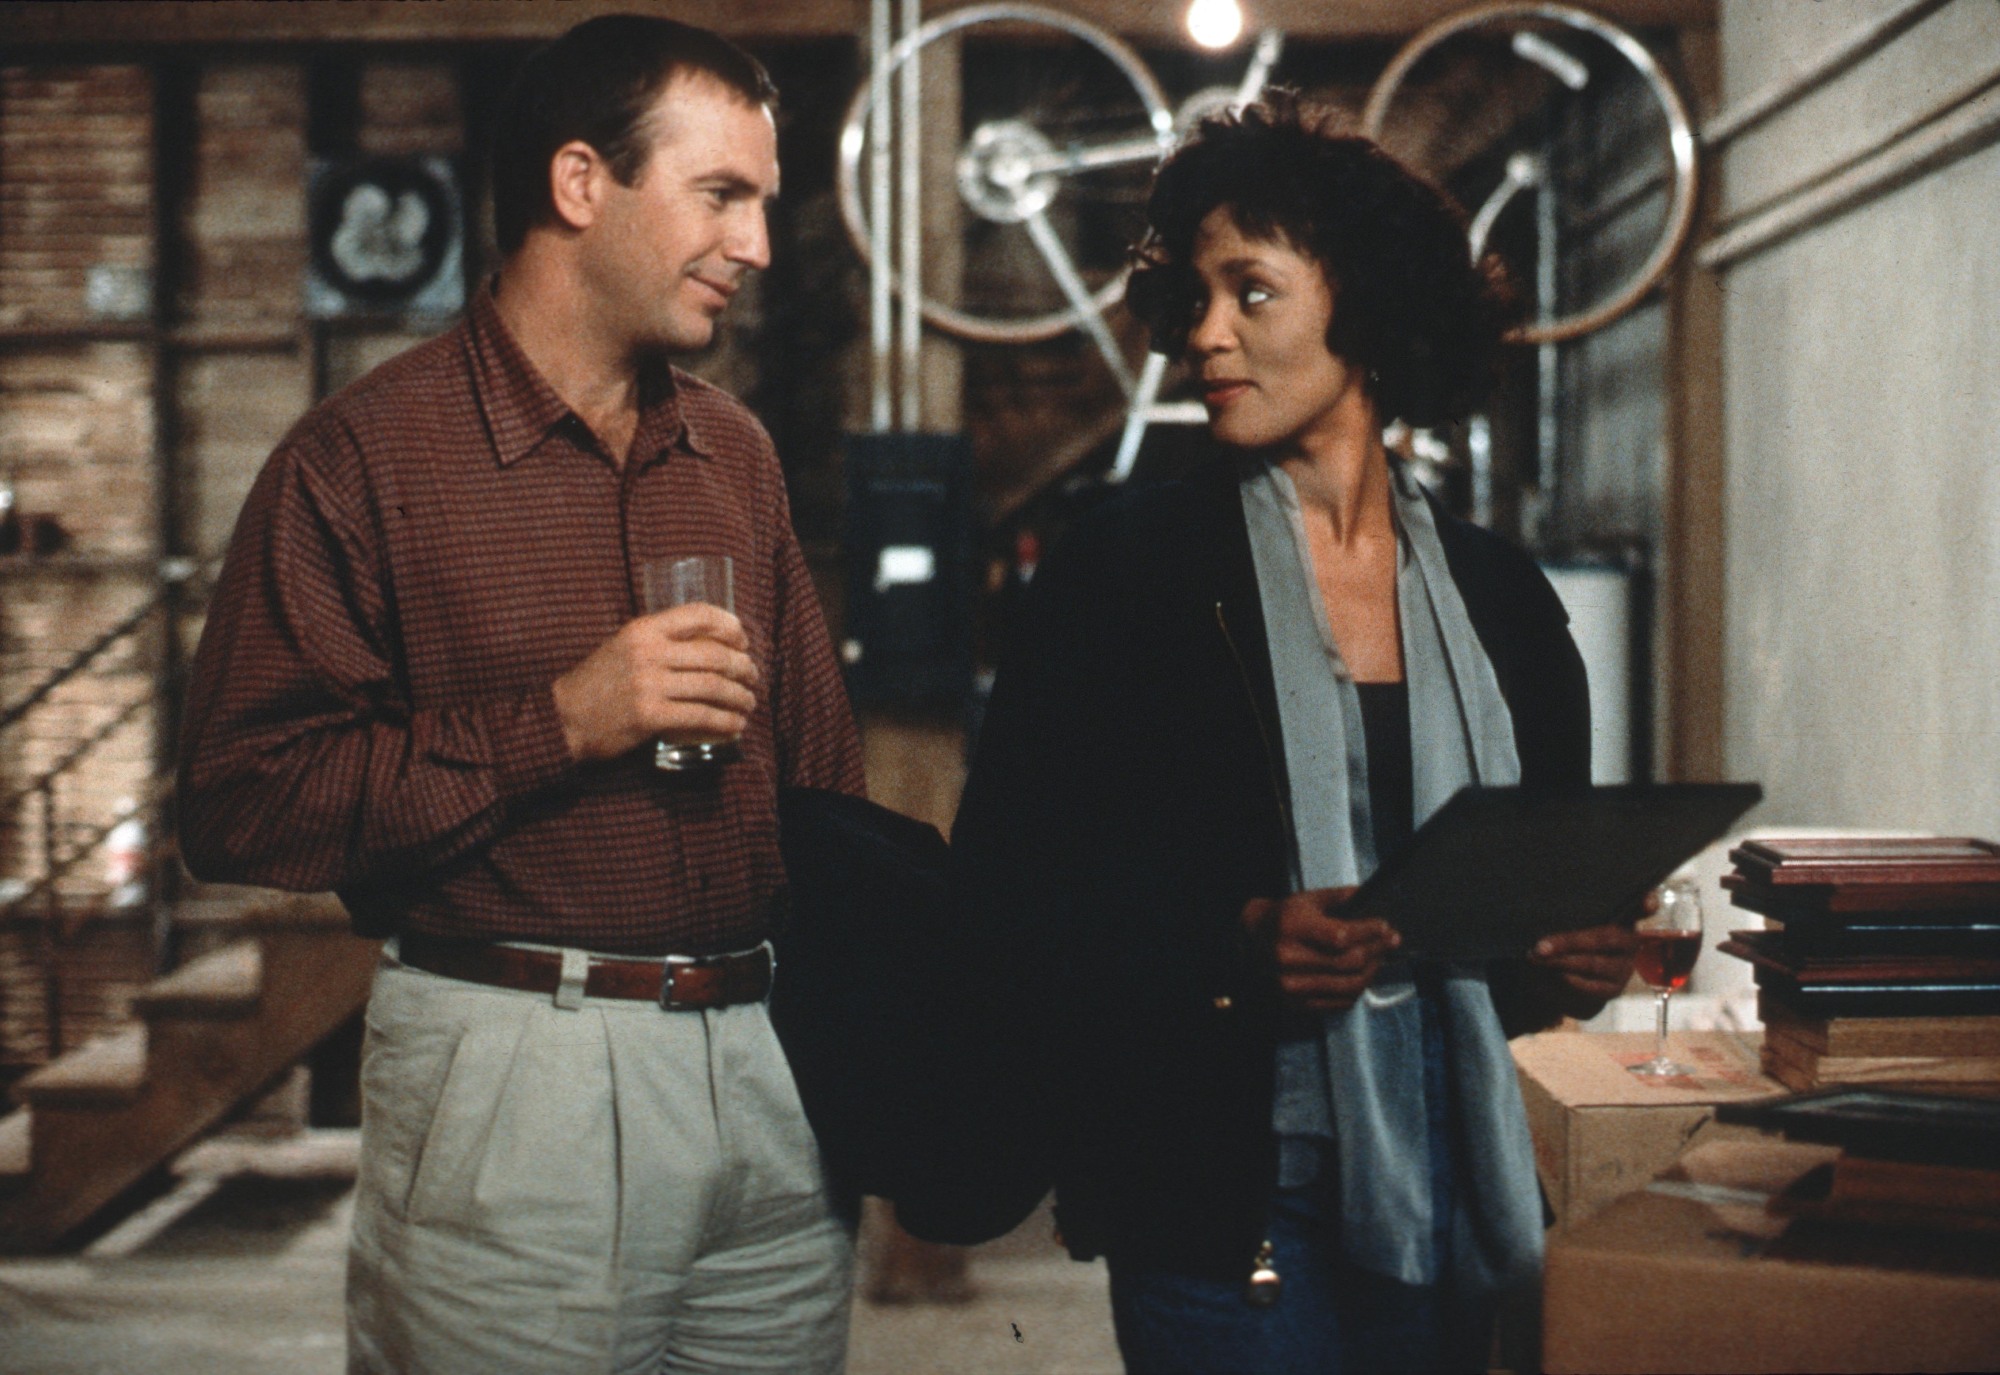 Kevin Costner and Whitney Houston fall hard in "The Bodyguard ."